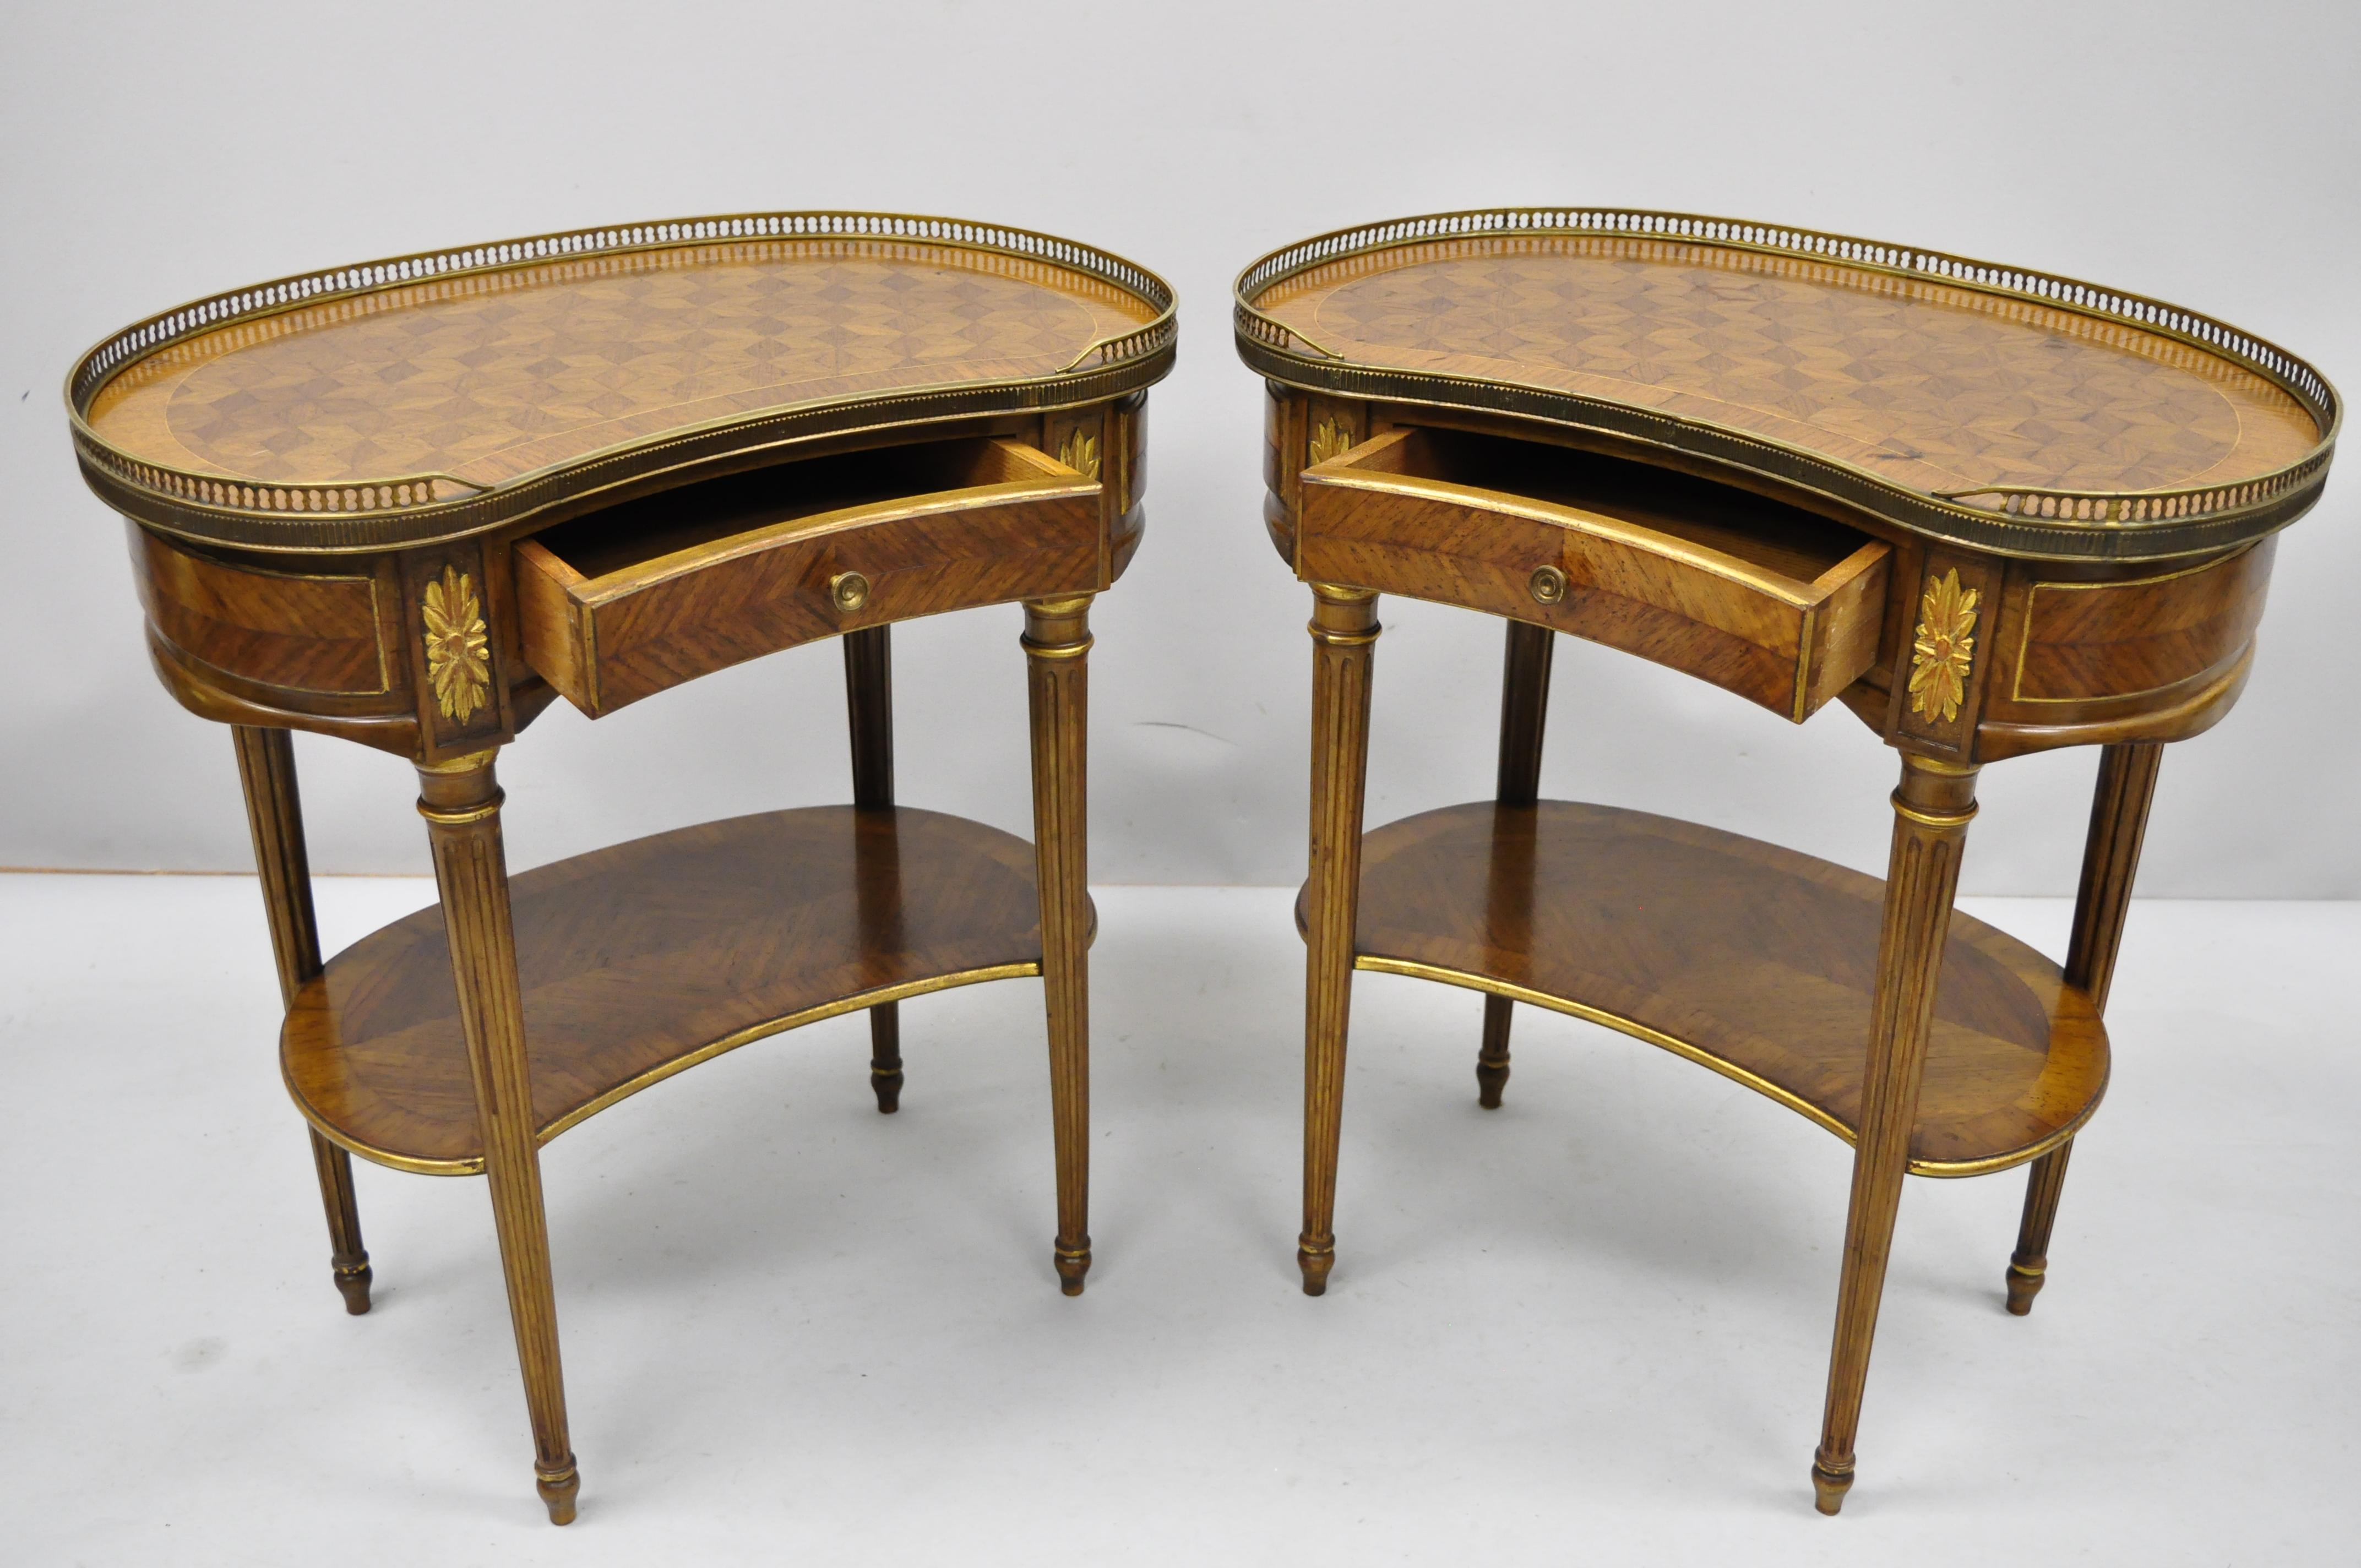 Pair of French Louis XVI style kidney shaped nightstand bedside tables by Simon Loscertales Bona. Item features one dovetailed drawer, brass gallery, marquetry inlay top, kidney bean shape, tapered legs, lower shelf, original tag, quality